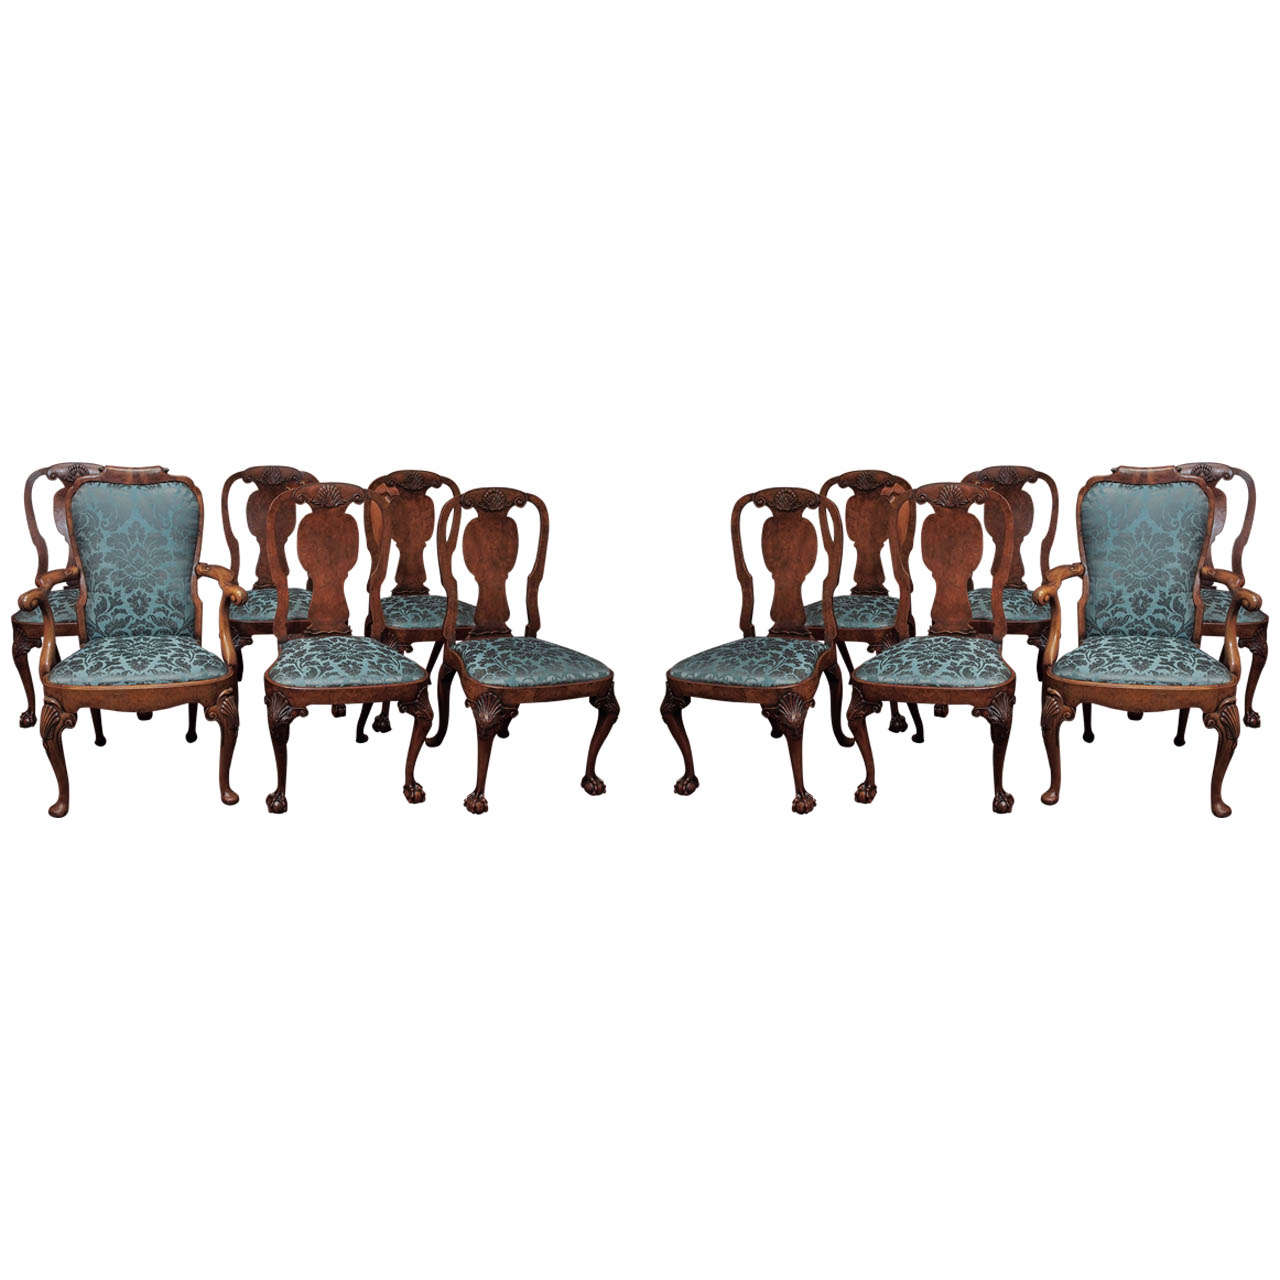 Set of 12 Antique Walnut Queen Anne Style DIning Chairs circa 1865-1885